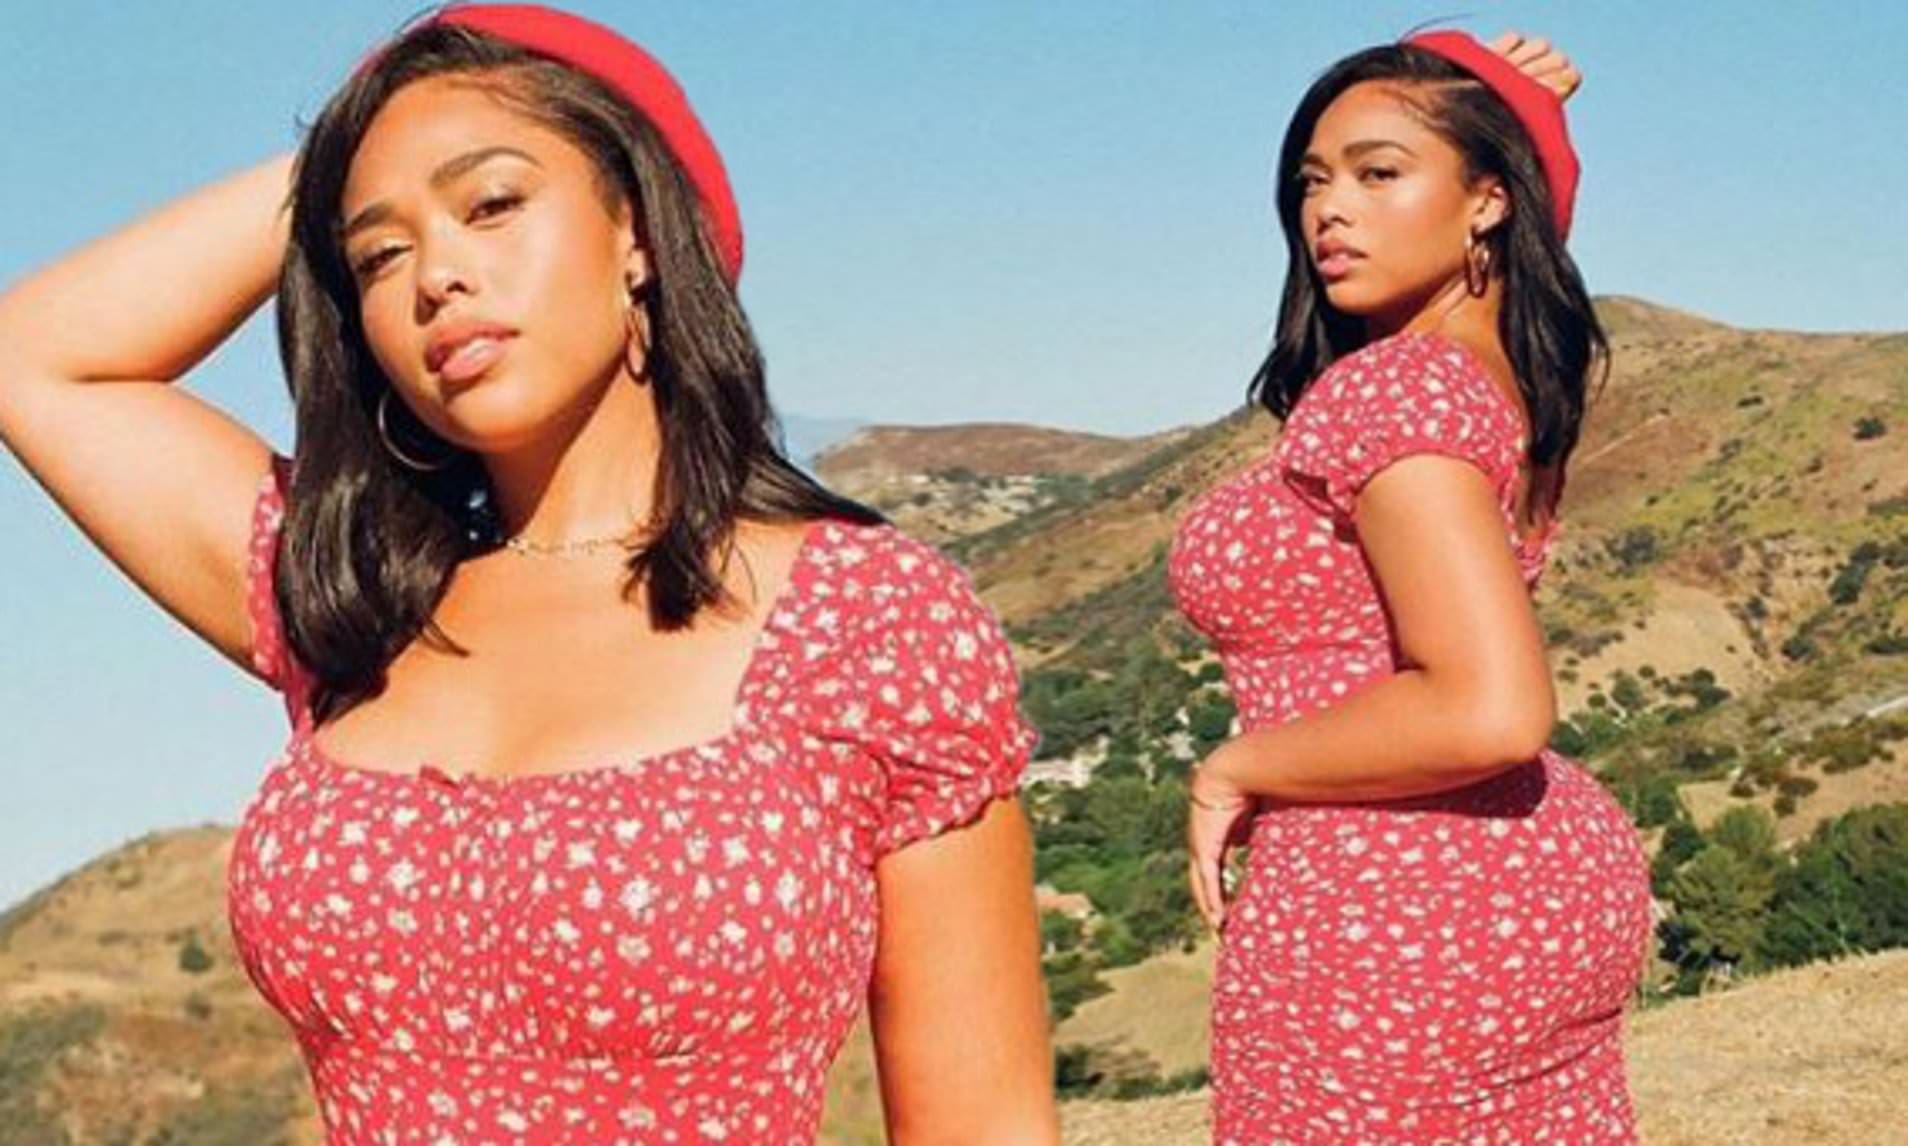 Jordyn Woods Breaks The Internet With Her Mod Magazine Photos - See Them Here